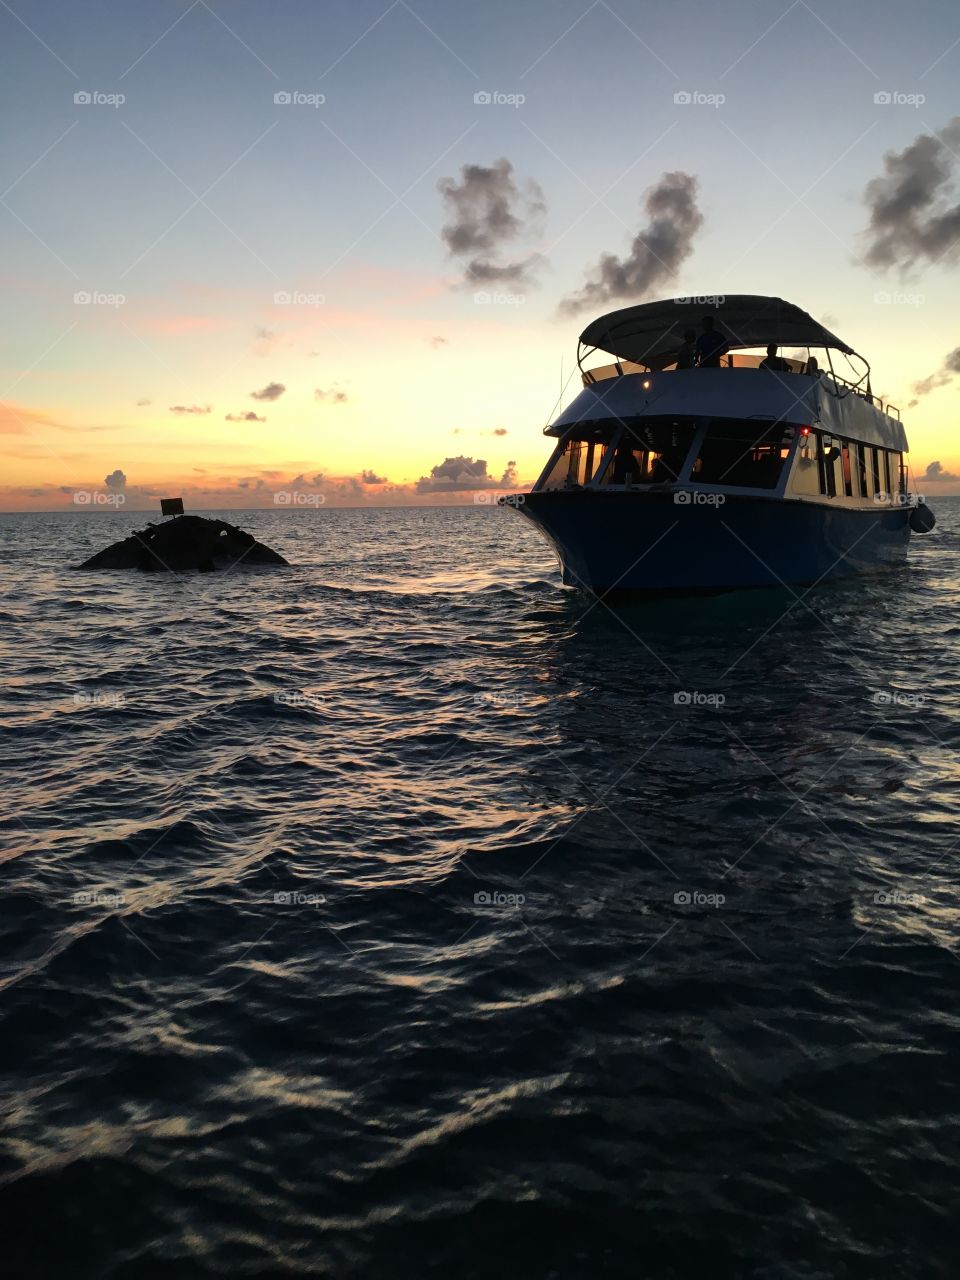 A glass-bottom tour boat checking out the HMS Vixen Shipwreck in Bermuda. Taken July 28th, 2016. No filter. Photographed from within the Bermuda Triangle. 